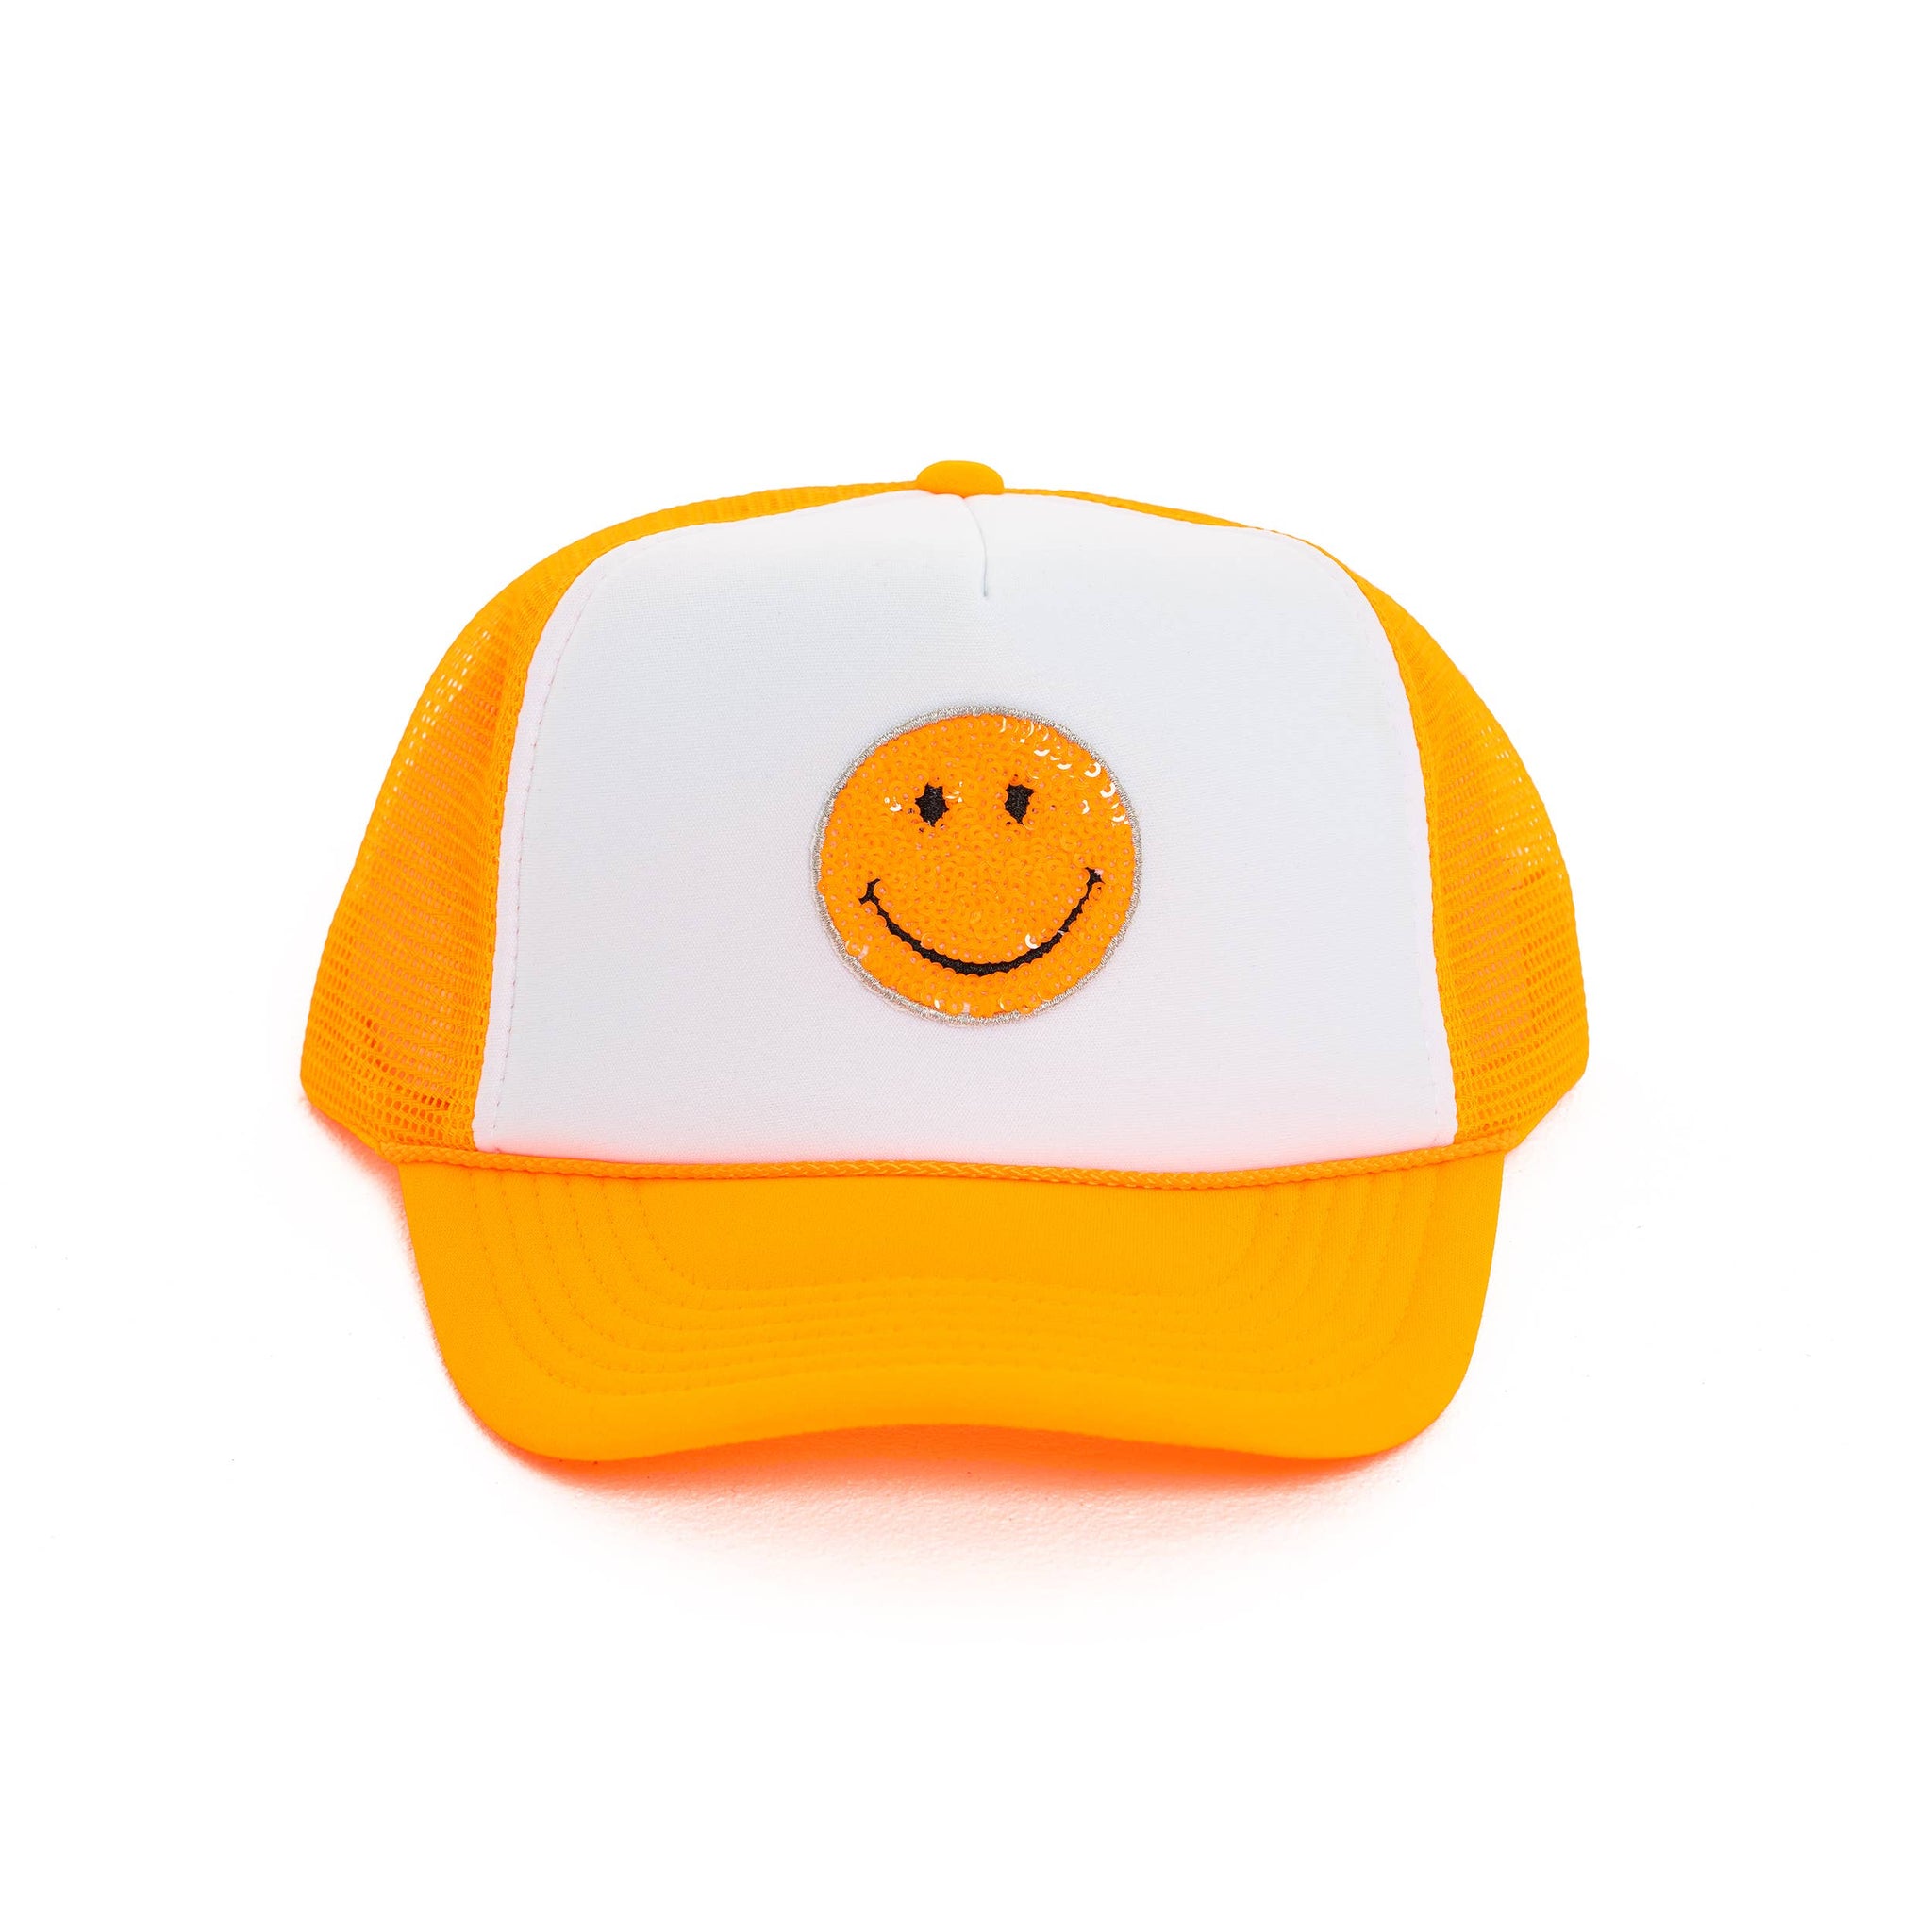 Trucker Hat w/ Smiley Face Patch for Kids